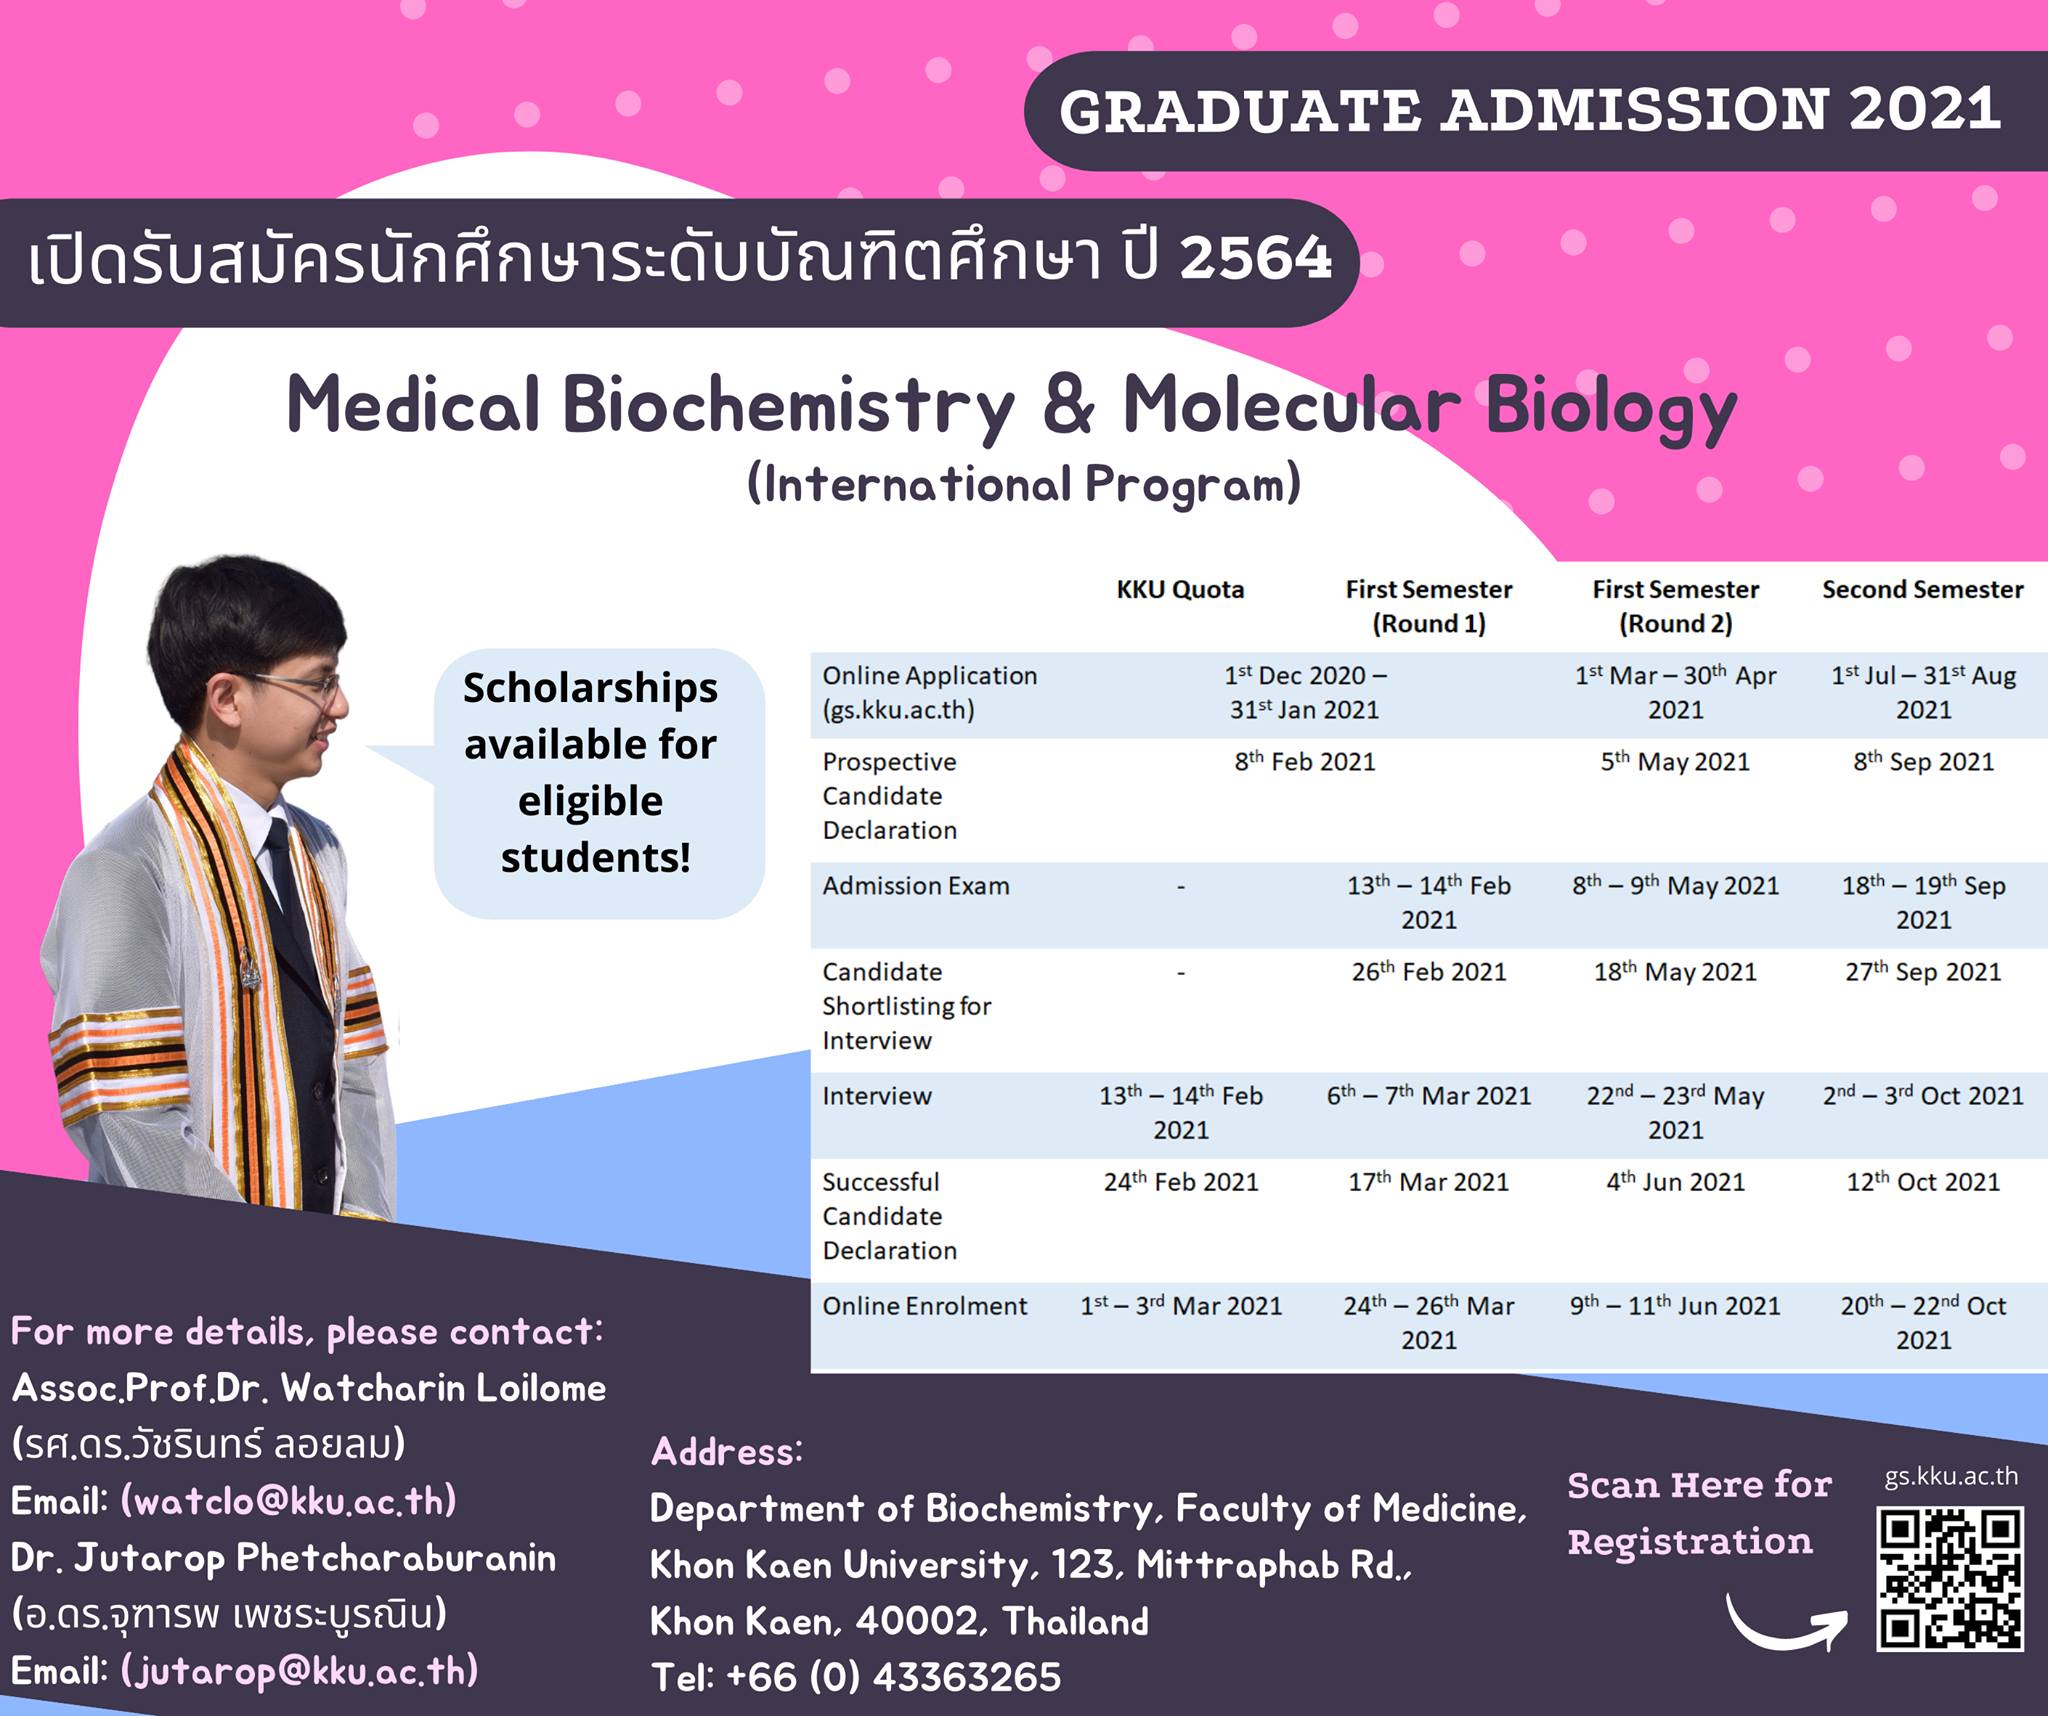 MBMB graduate program is open for admission